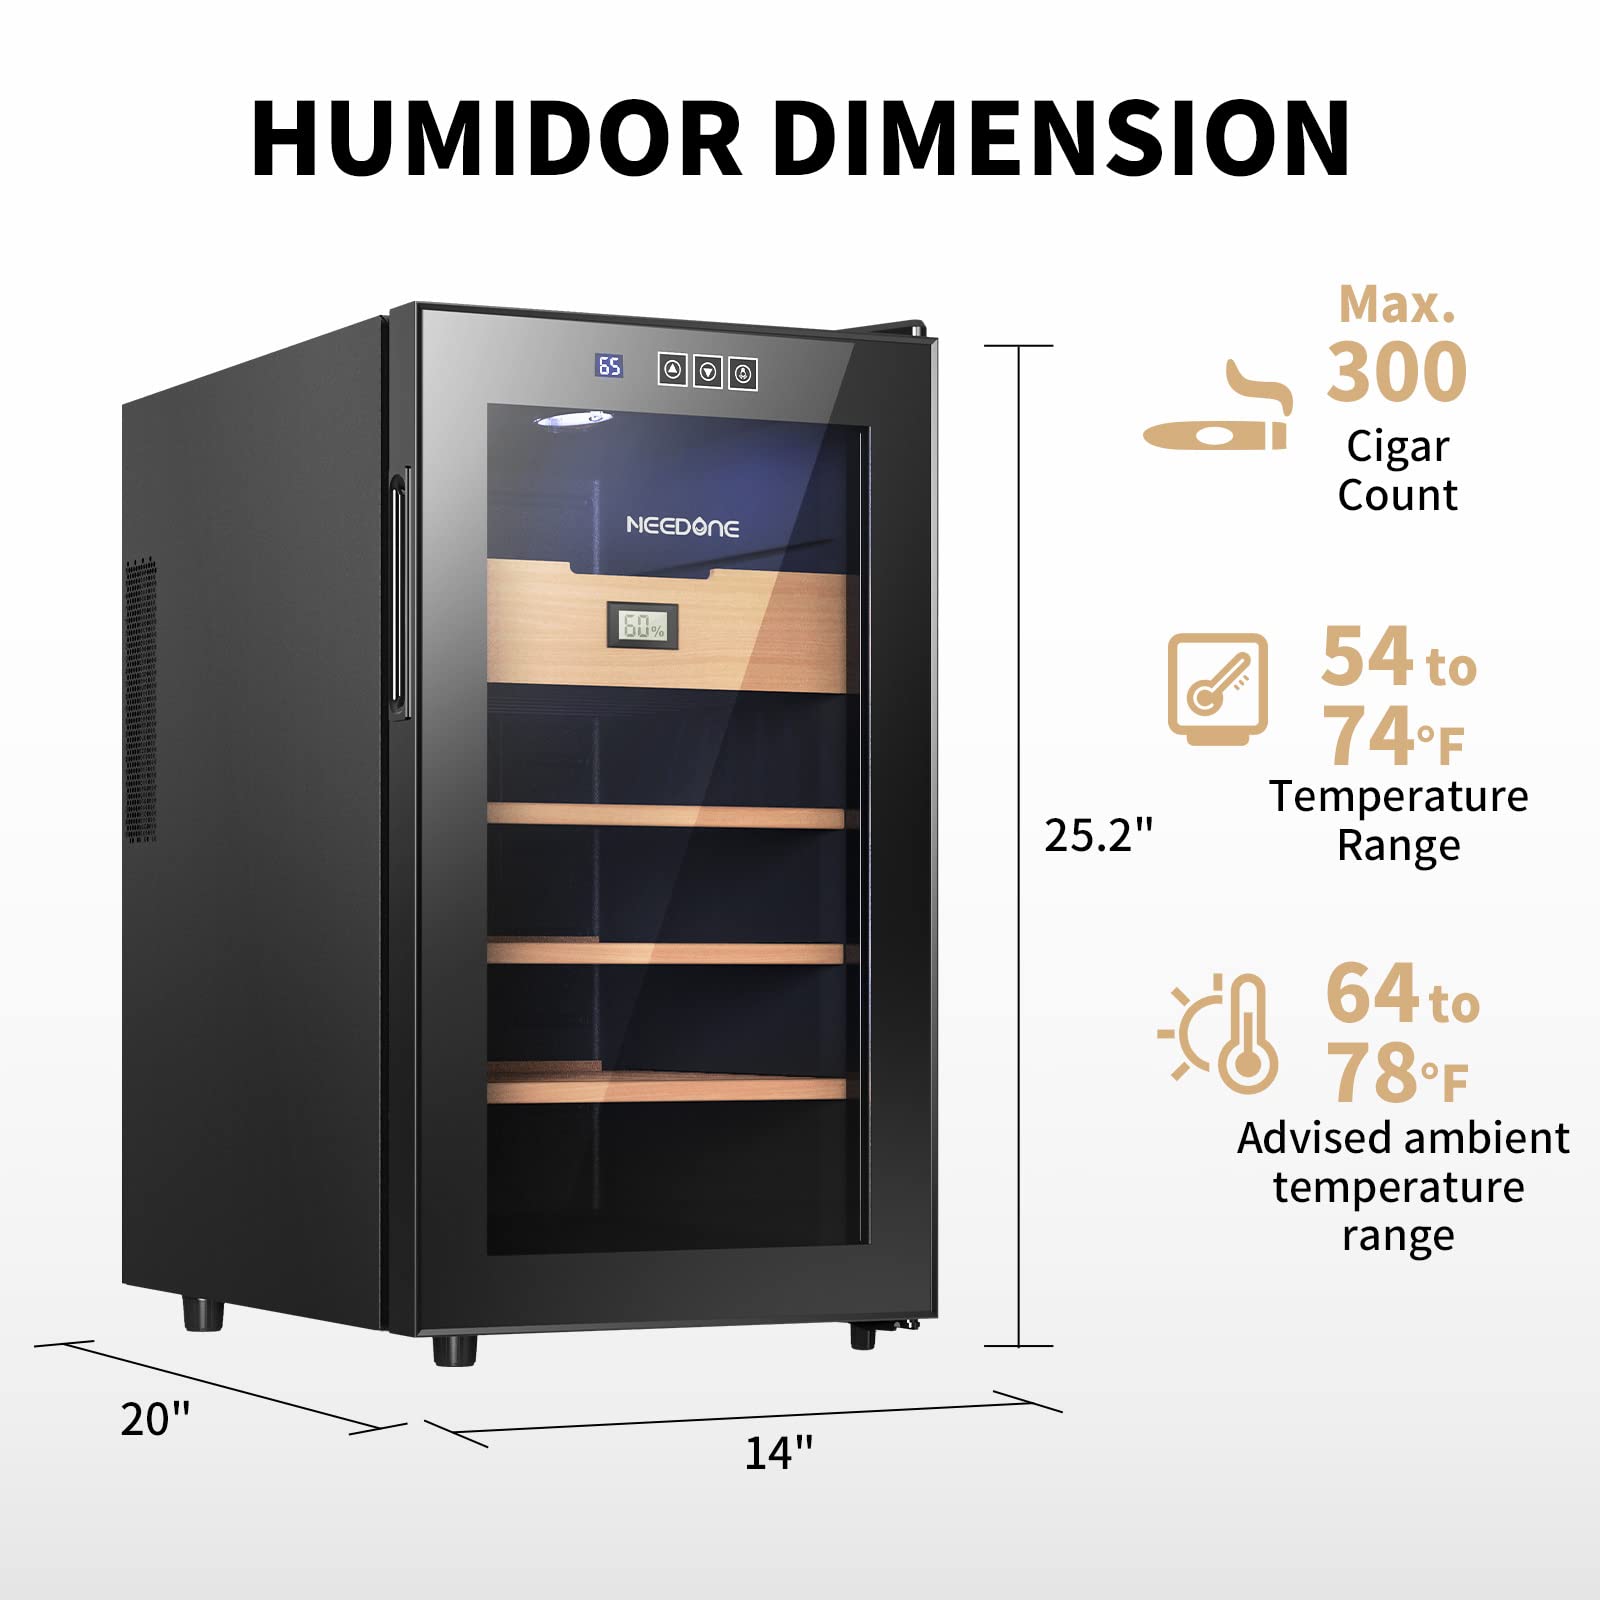 NEEDONE Cigar Humidor 48L with Heating and Cooling Temperature Control System, Quiet Thermostatic Electric Cooler Cabinet for 350 Counts with Digital Hygrometer, Spanish Cedar Wood, Gift for Men